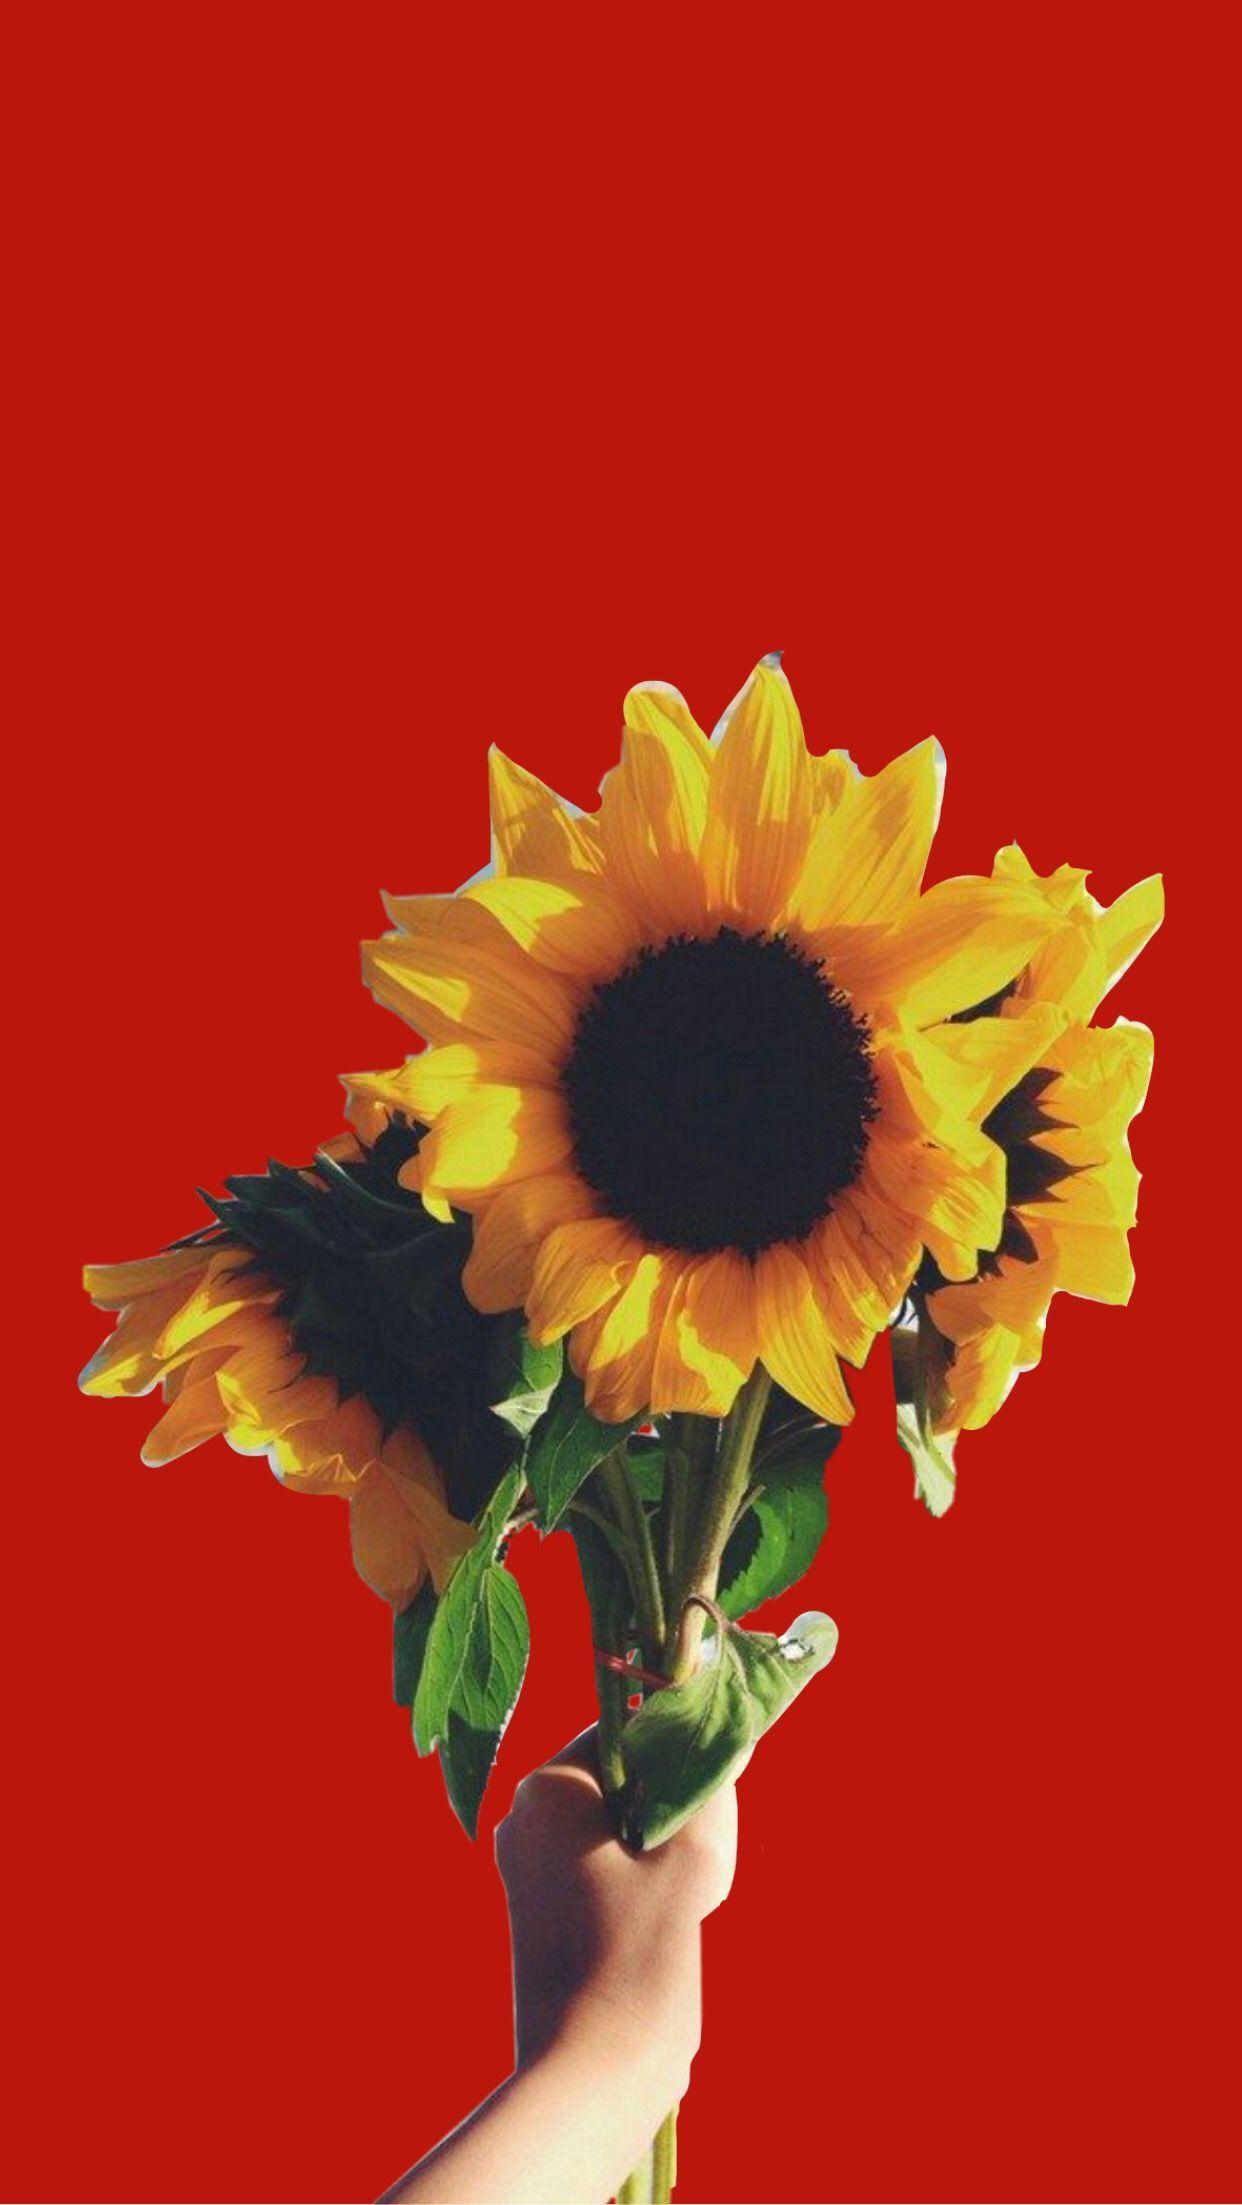 Msr Counseling Services Llc  Lock Screen Sunflower Wallpaper Iphone  PngPlant Icon Tumblr  free transparent png images  pngaaacom